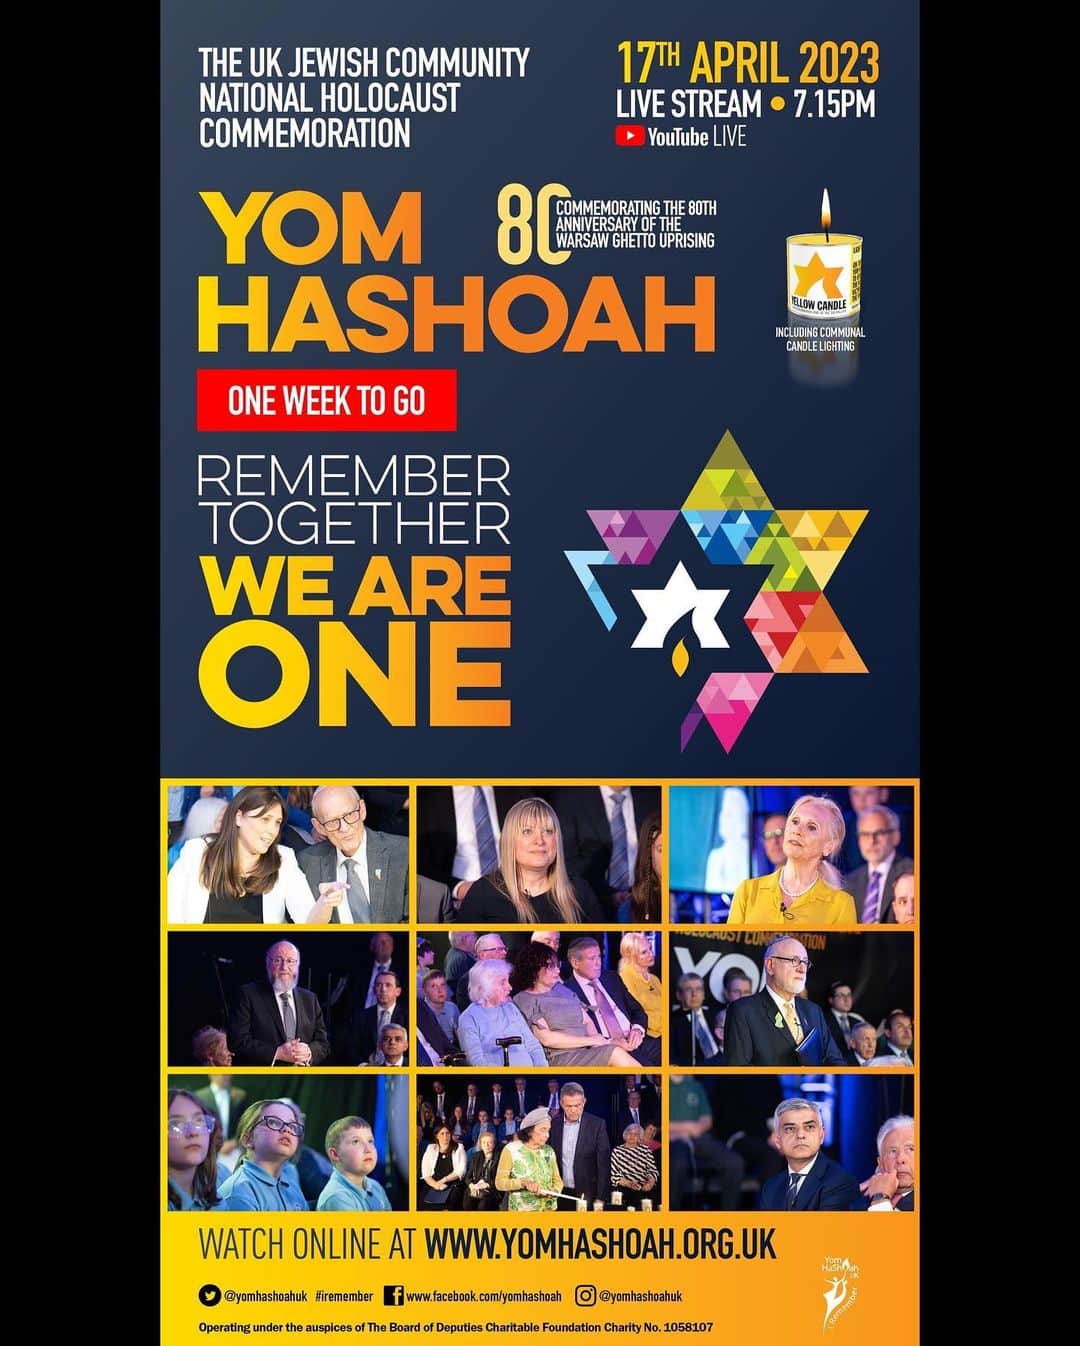 ローラ・プラデルスカのインスタグラム：「I feel deeply grateful for being asked to co-host and perform on Monday’s Annual Jewish remembrance day for victims of the Holocaust @yomhashoahuk   Next week’s main UK Yom HaShoah event to mark 80th anniversary of Warsaw Ghetto uprising and will be live-streamed.  “Among the guests will be dignitaries including Board of Deputies president Marie van der Zyl and Jewish Care president, Lord Levy , @chiefrabbi Chief Rabbi Ephraim Mirvis will lead the tribute to the heroism and the martyrs of the Warsaw Ghetto uprising. Martin tells Jewish News: “It’s important to show the fightback. It showed a glimmer of hope. That the Jewish people didn’t just sit there and succumb. There were resistance movements; the Righteous Amongst the Nations who hid Jews. Refugees who went on to fight. There’s a lot to remember.” Henry Grunwald KC will be co-hosting the ceremony with #GameofThrones German Jewish actress Laura Pradelska, whose four grandparents were survivors. Holocaust Survivors Centre members speaking at the event include Janine Webber, a survivor of the Lwów Ghetto in Poland (now Lviv, Ukraine); Auschwitz survivor Ivor Perl and Henny Franks , who came across on the Kindertransport and celebrates her 100th birthday in June  @neilsmartin says he is keen for the community to access the ceremony via @youtube It’s a comfortable way to watch it in broadcast quality.” He believes it is important that “with your yellow candle and your Smart TV, with your family, sitting on your sofa, you can all light candles simultaneously with people across the UK - It brings the whole community together as one.” Thirty-five thousand commemorative Yellow Candles have been bought The message, says Martin, is about “making this for the next generation”   #yomhashoah #neveragain #YomHashoah #refugees #Kindertransport」